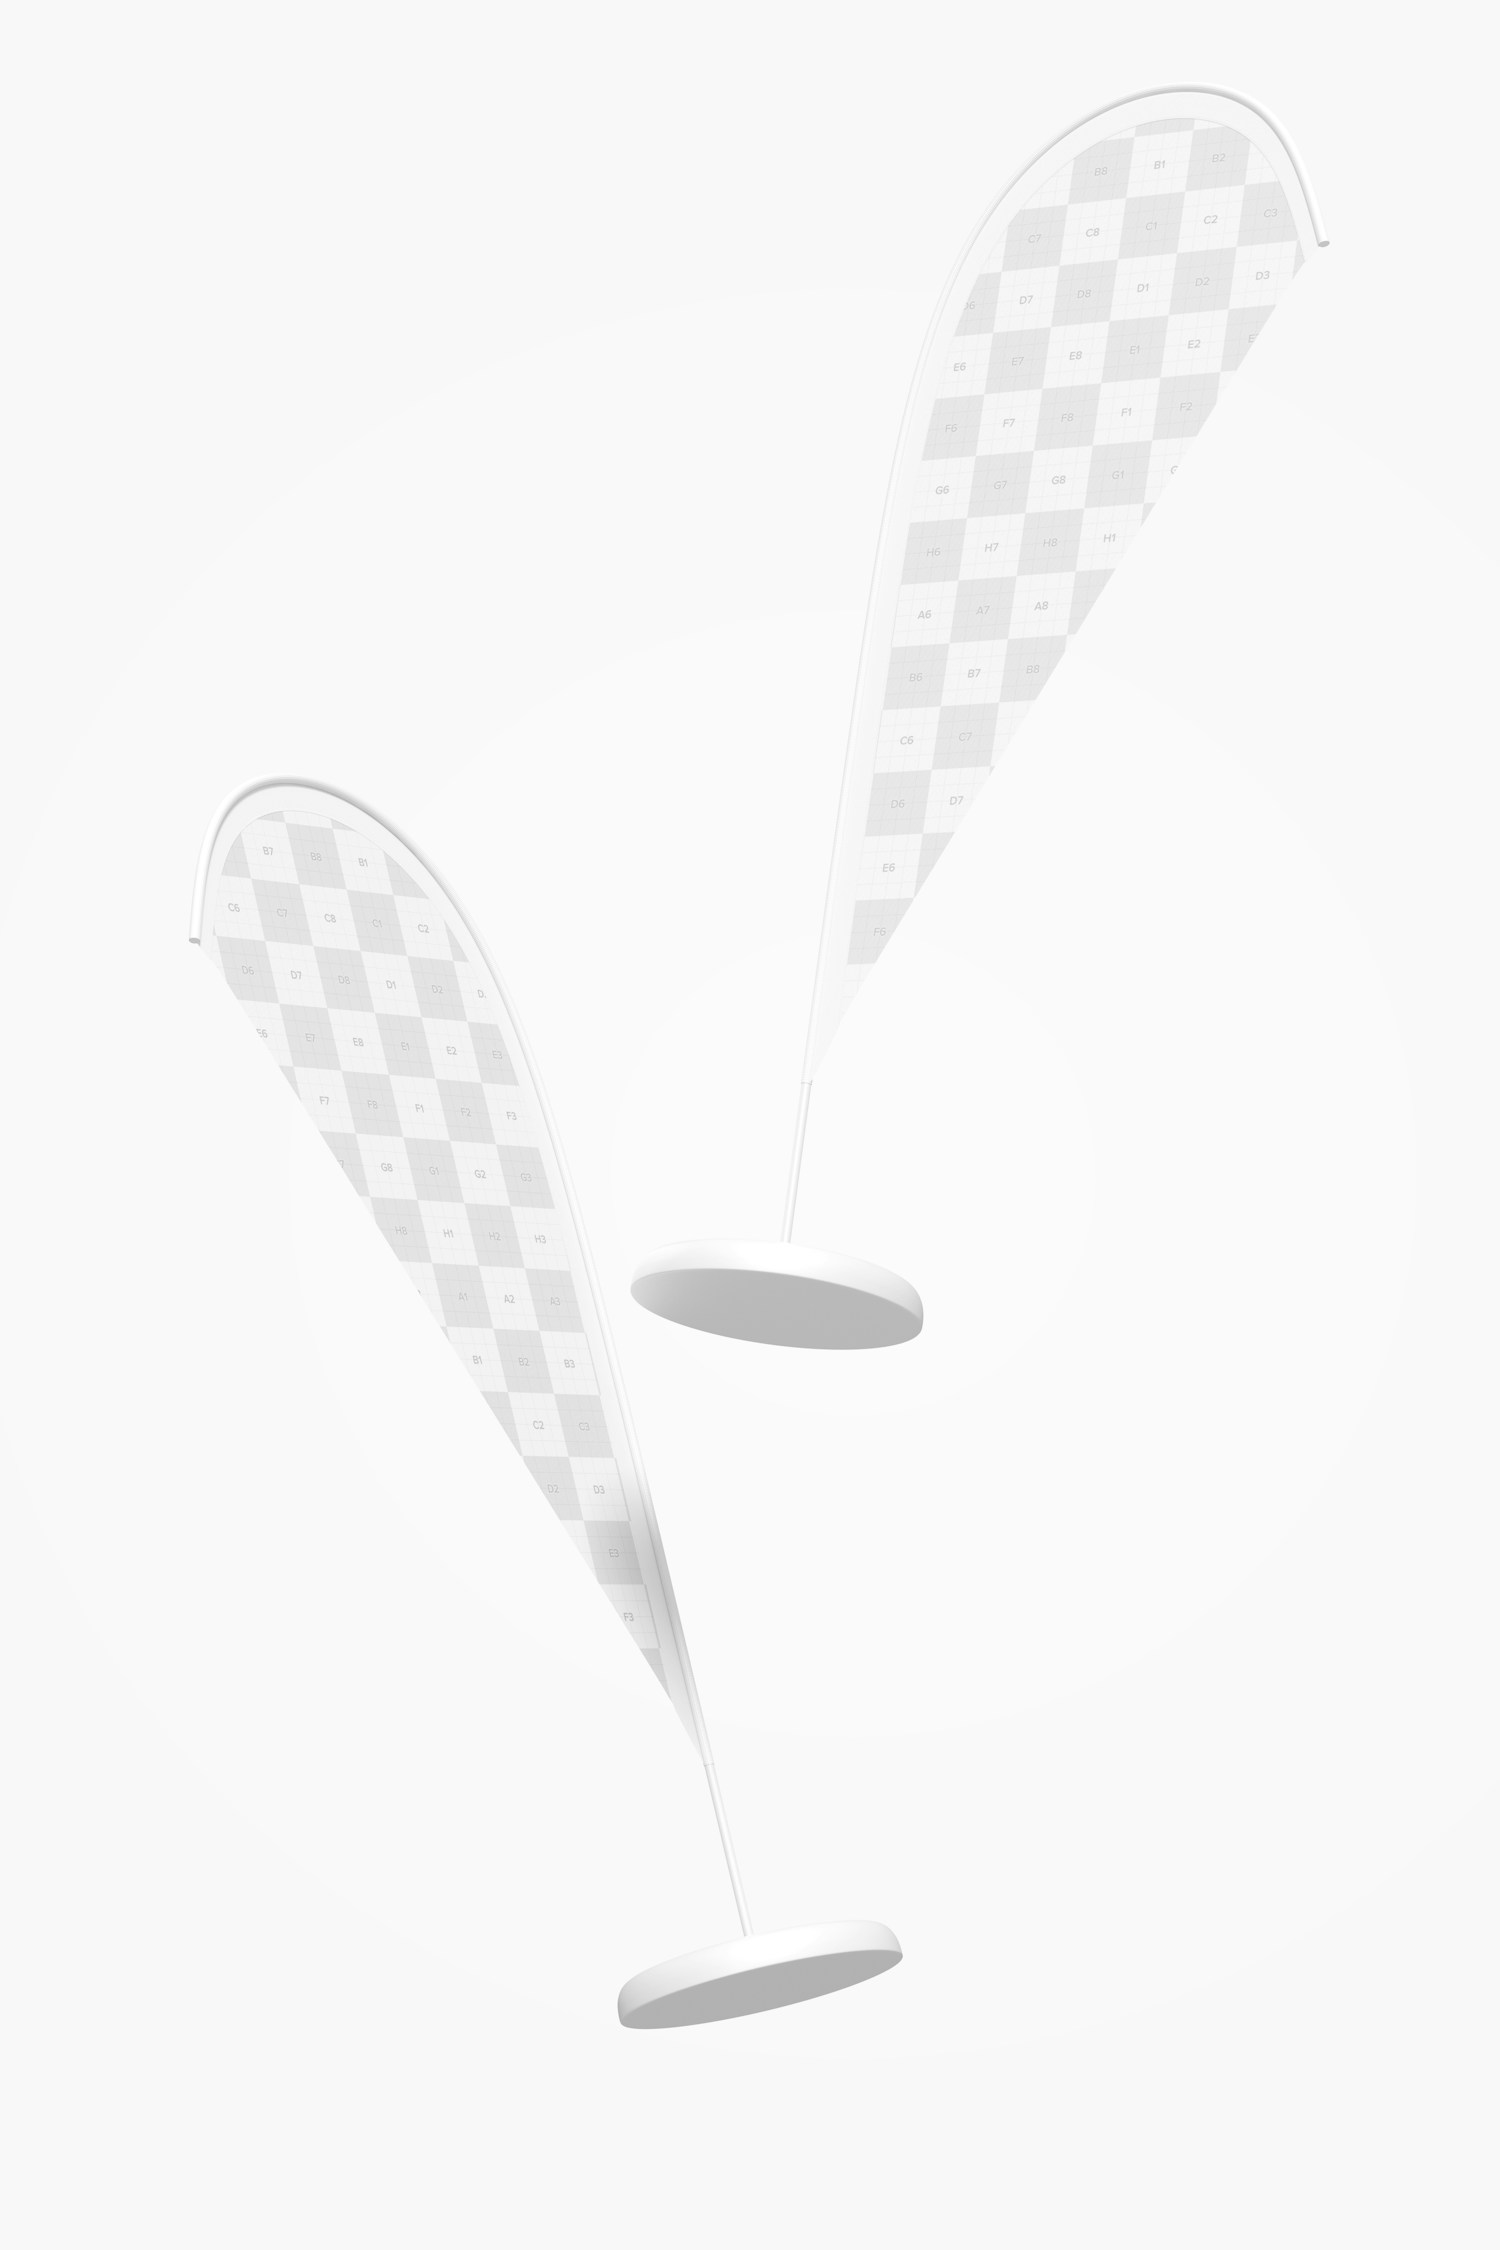 Feather Flag Banners Mockup, Floating